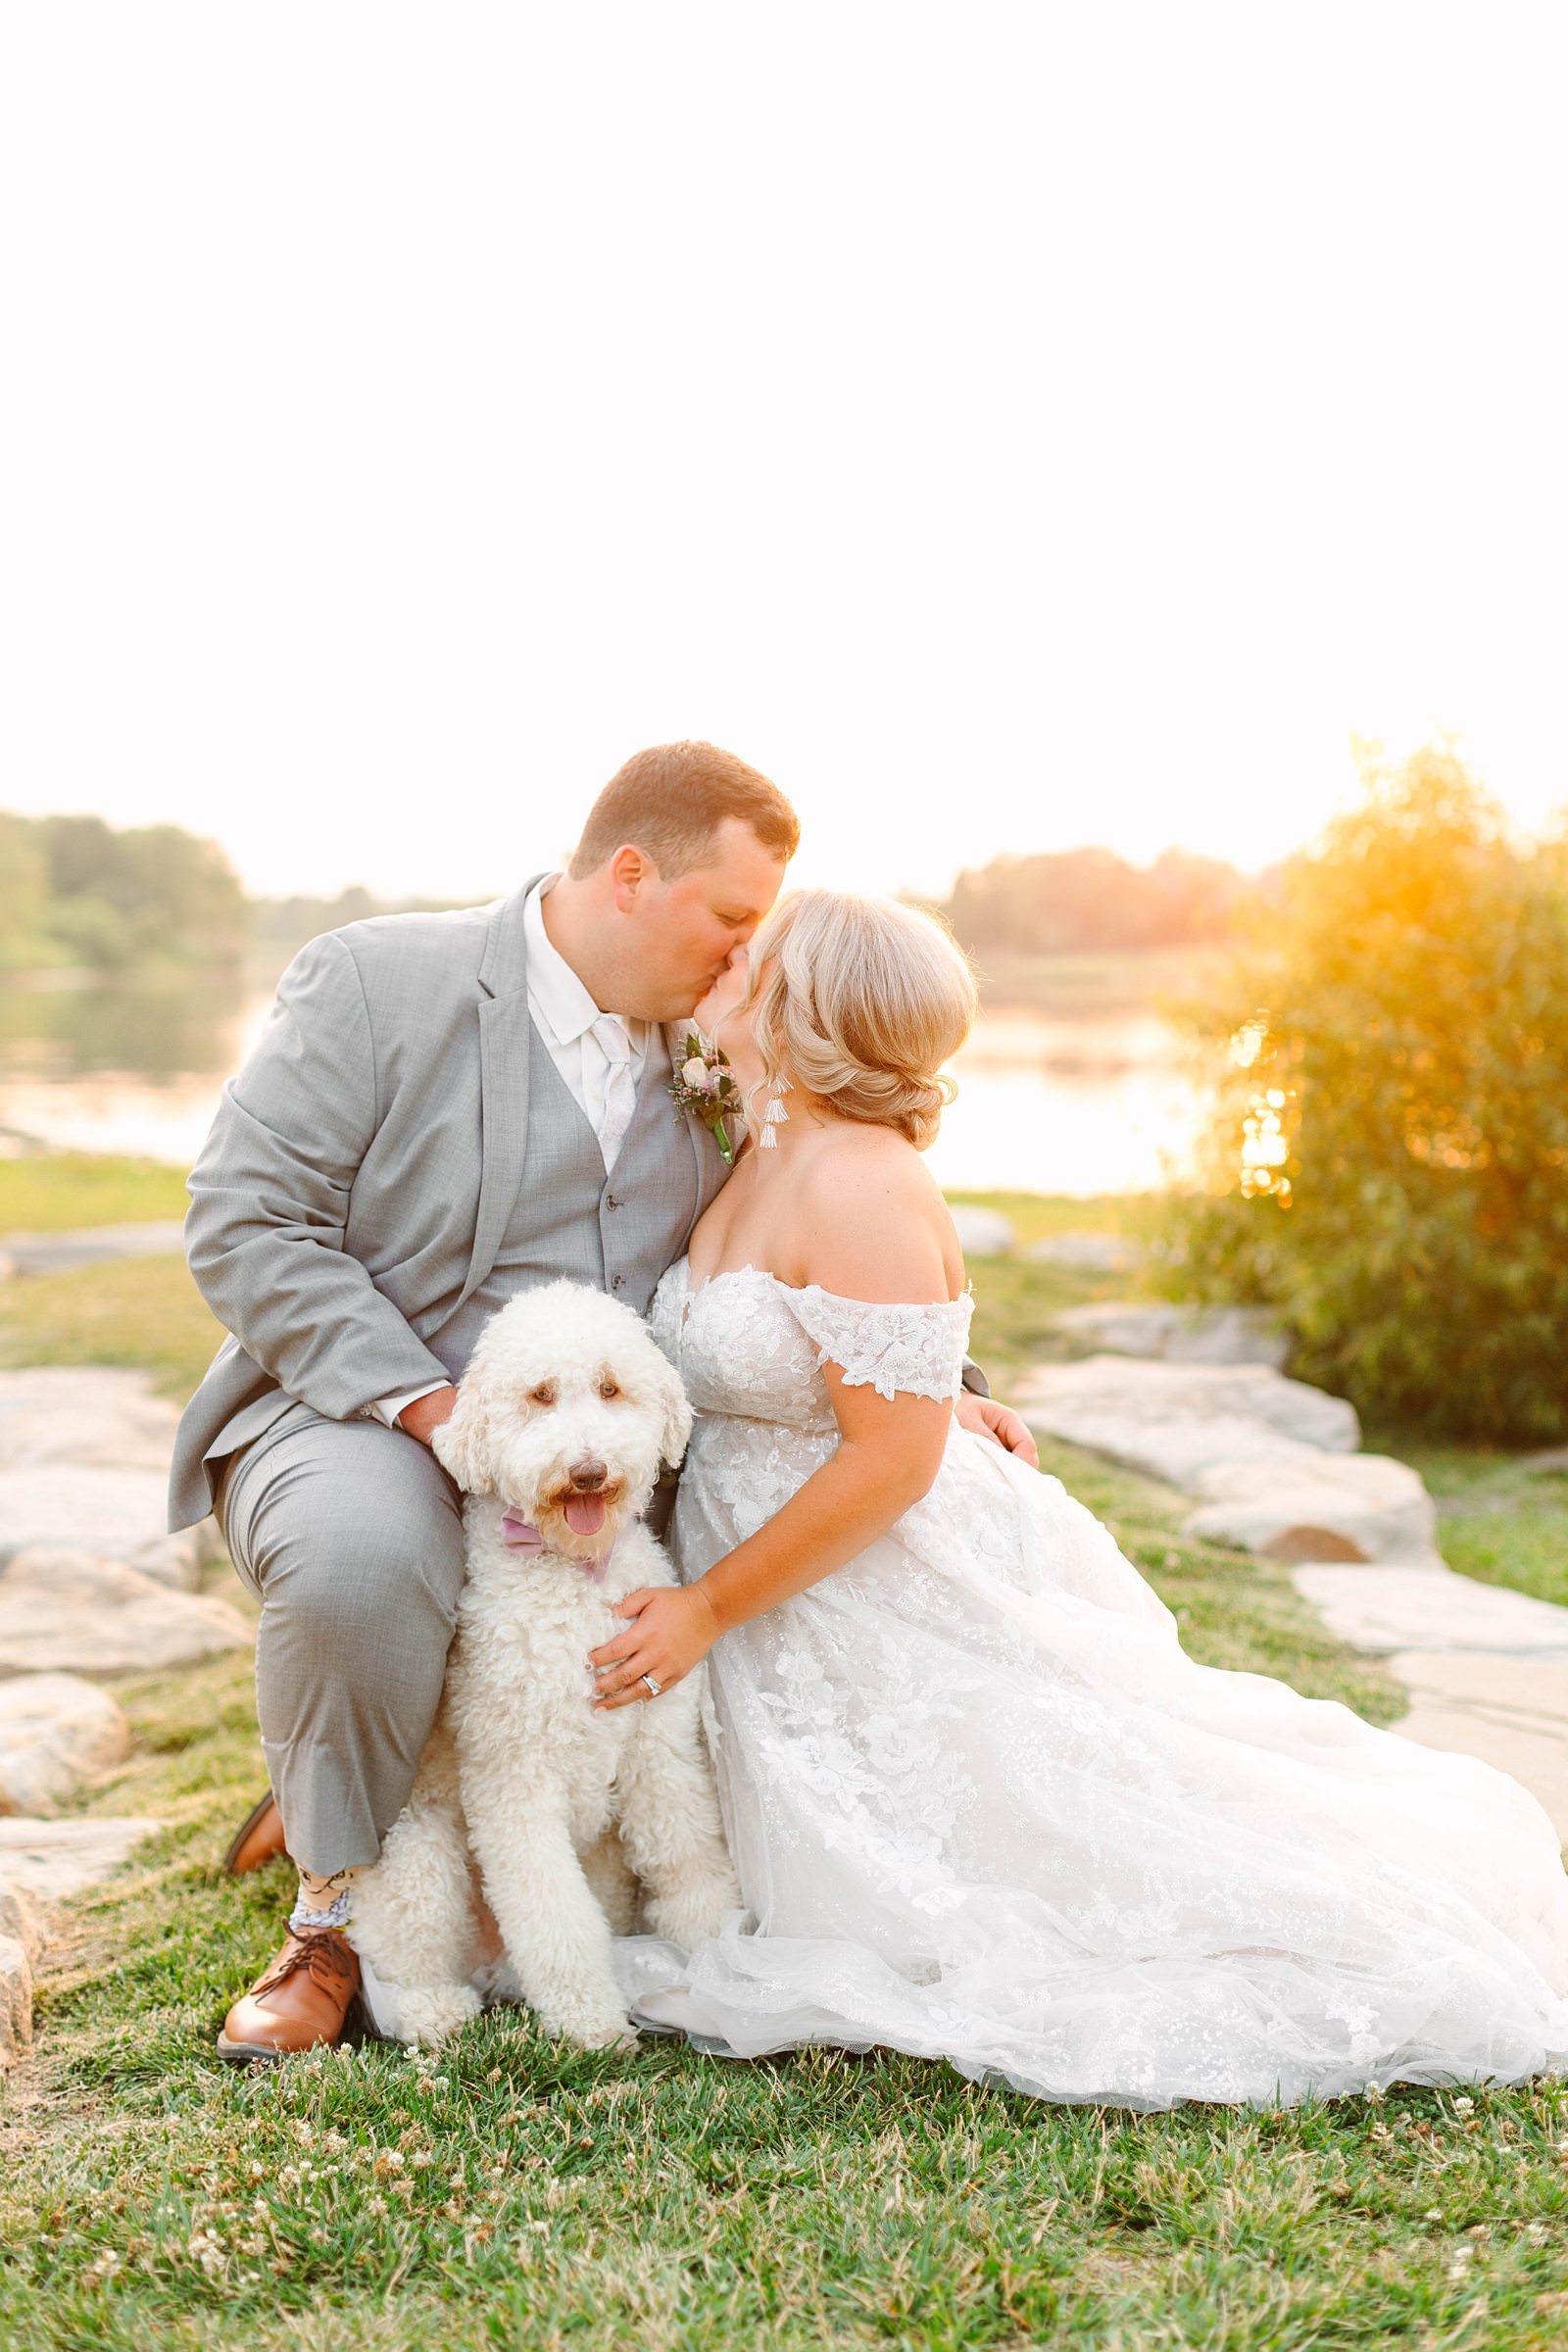 A Sunny Summer Wedding at Friedman Park in Newburgh Indiana | Paige and Dylan | Bret and Brandie Photography181.jpg